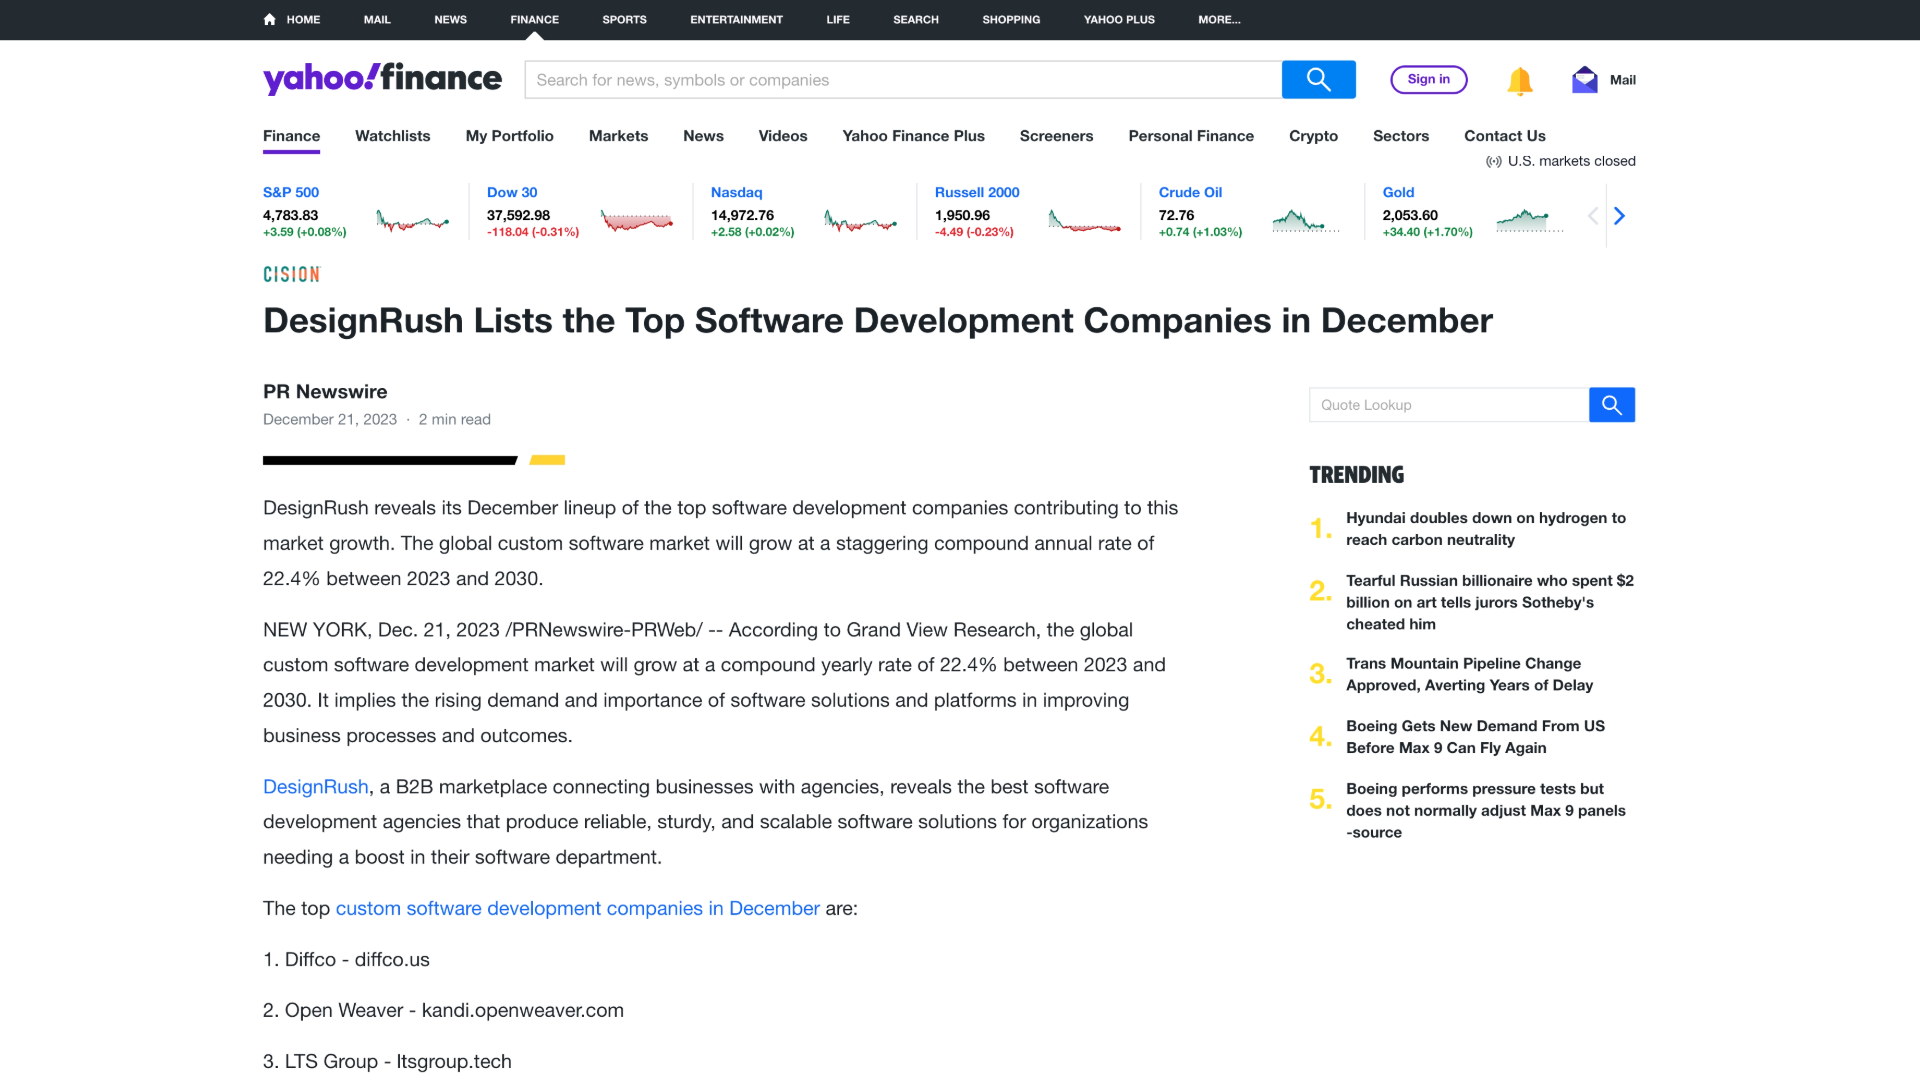 Hooman Listed Among Top Software Development Companies by Design Rush